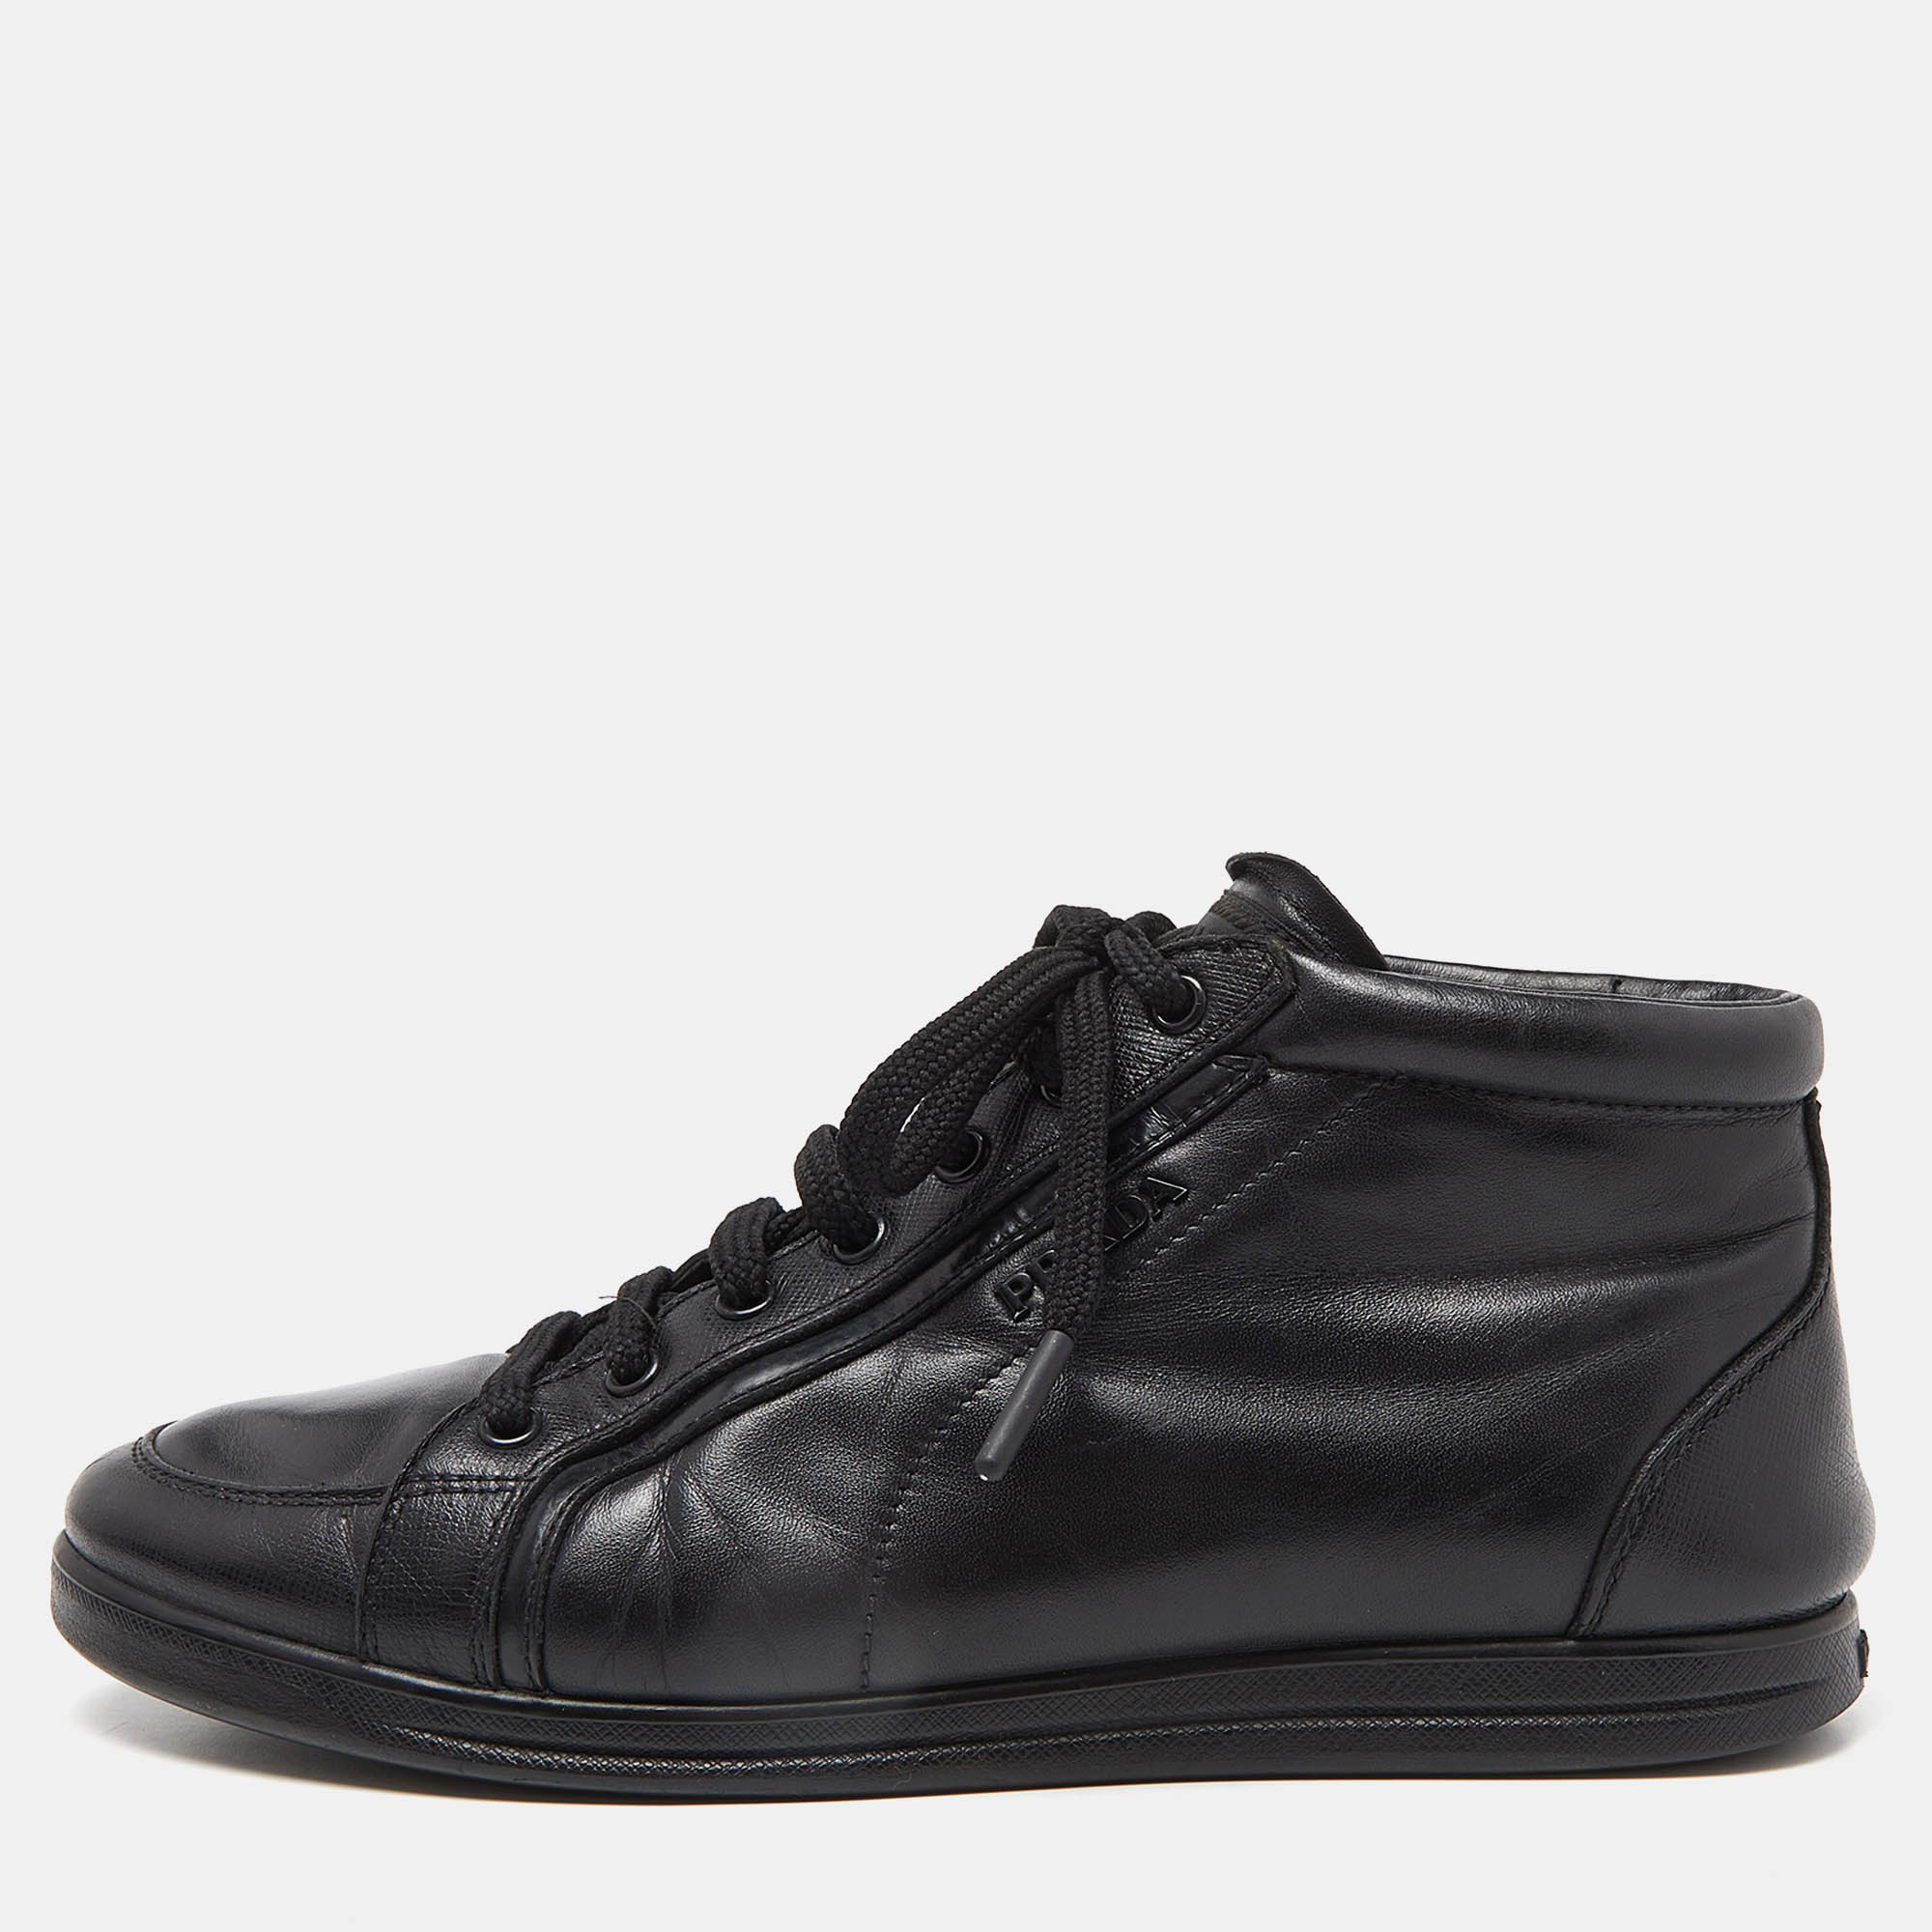 Pre-owned Prada S Black Leather Lace Up Sneakers Size 36